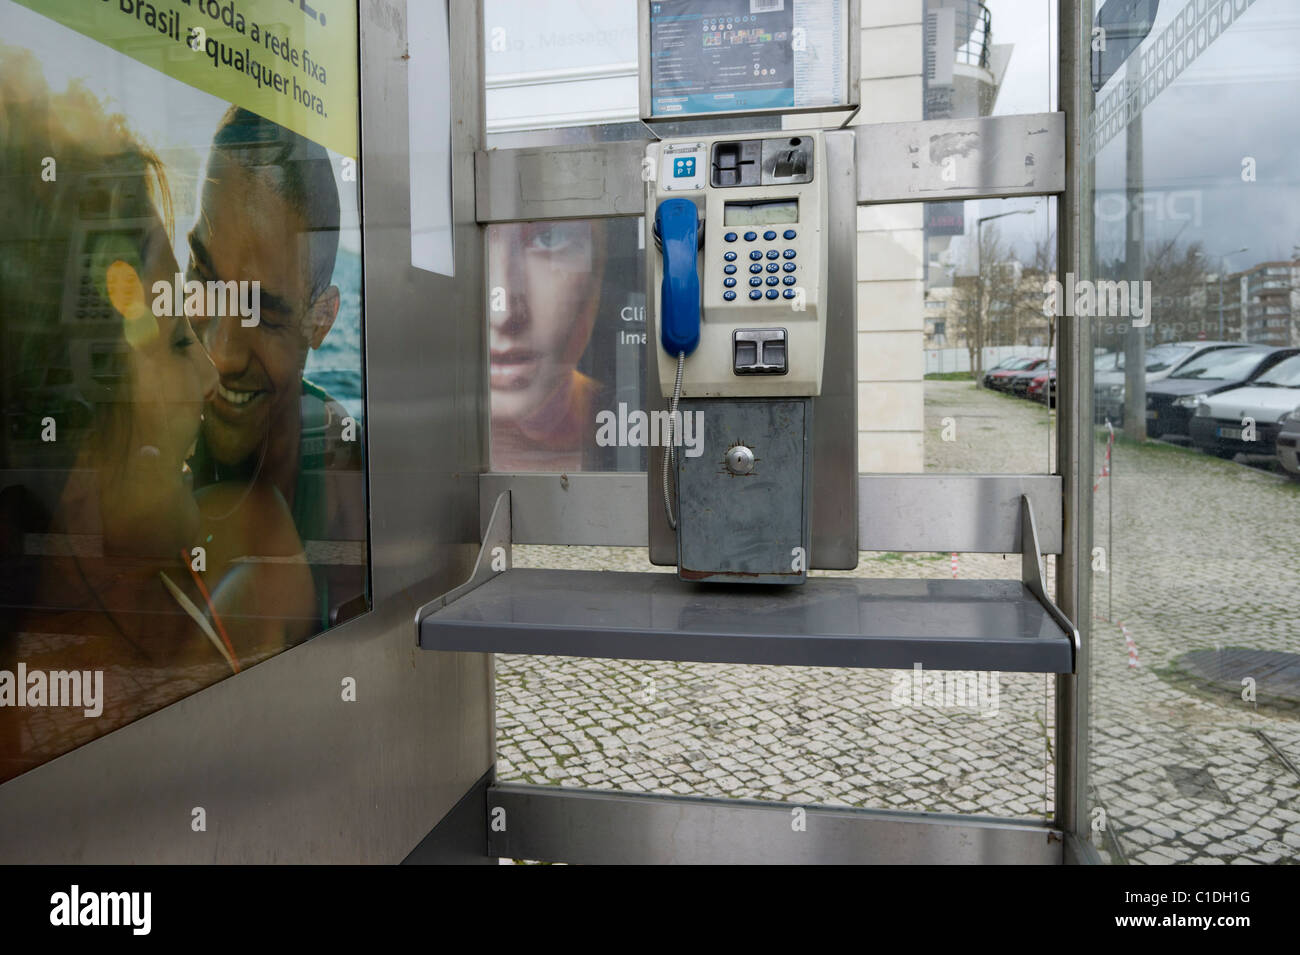 Empty public pay phone booth in Portugal Stock Photo